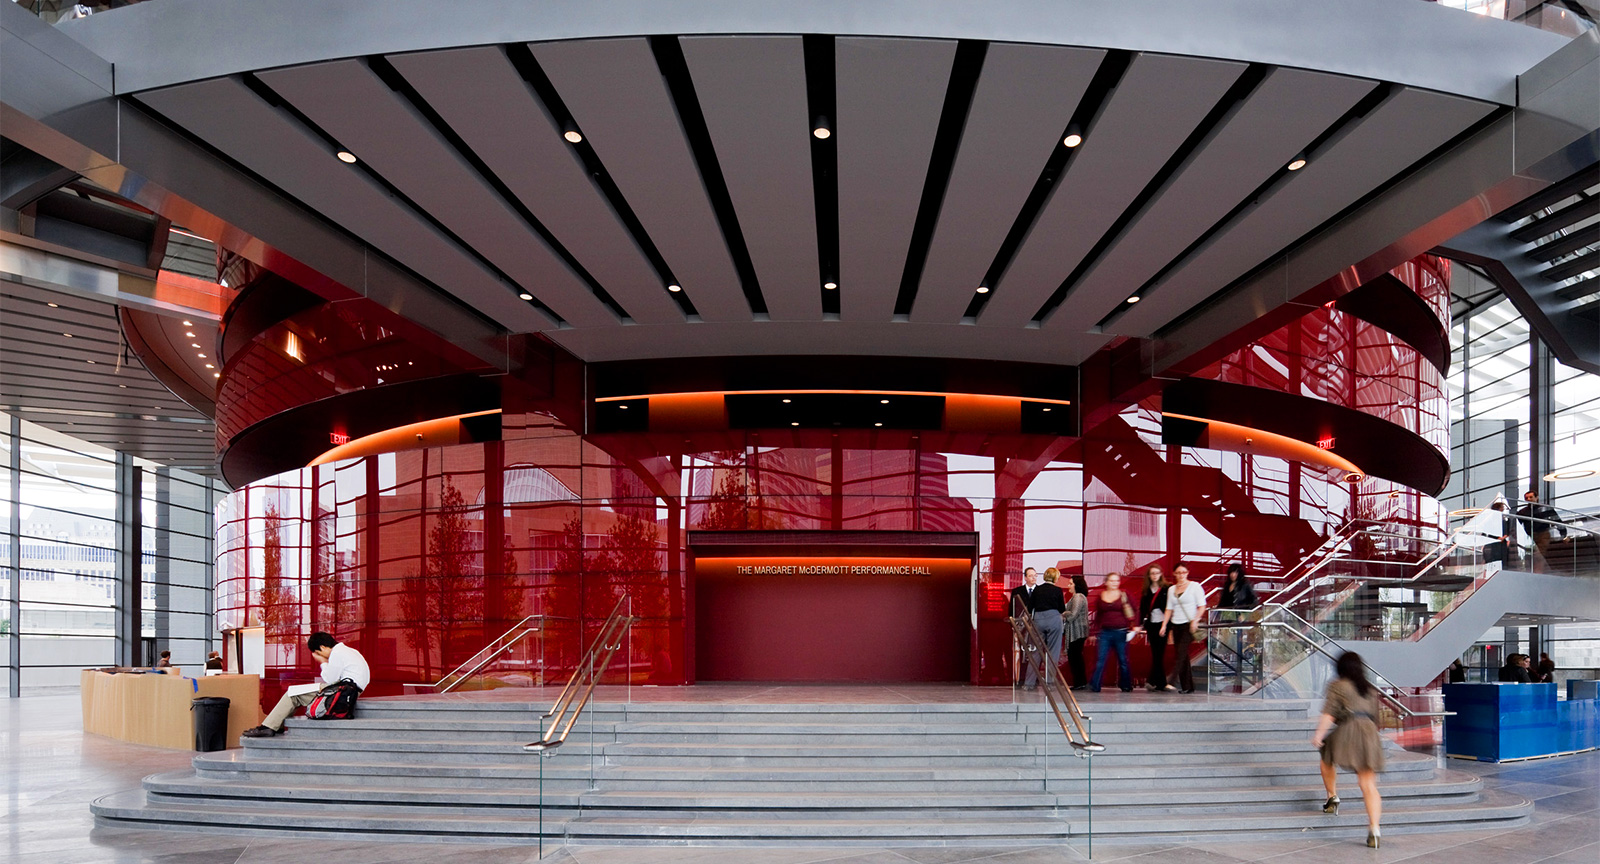 Dallas Arts District Performing Arts Winspear Opera House